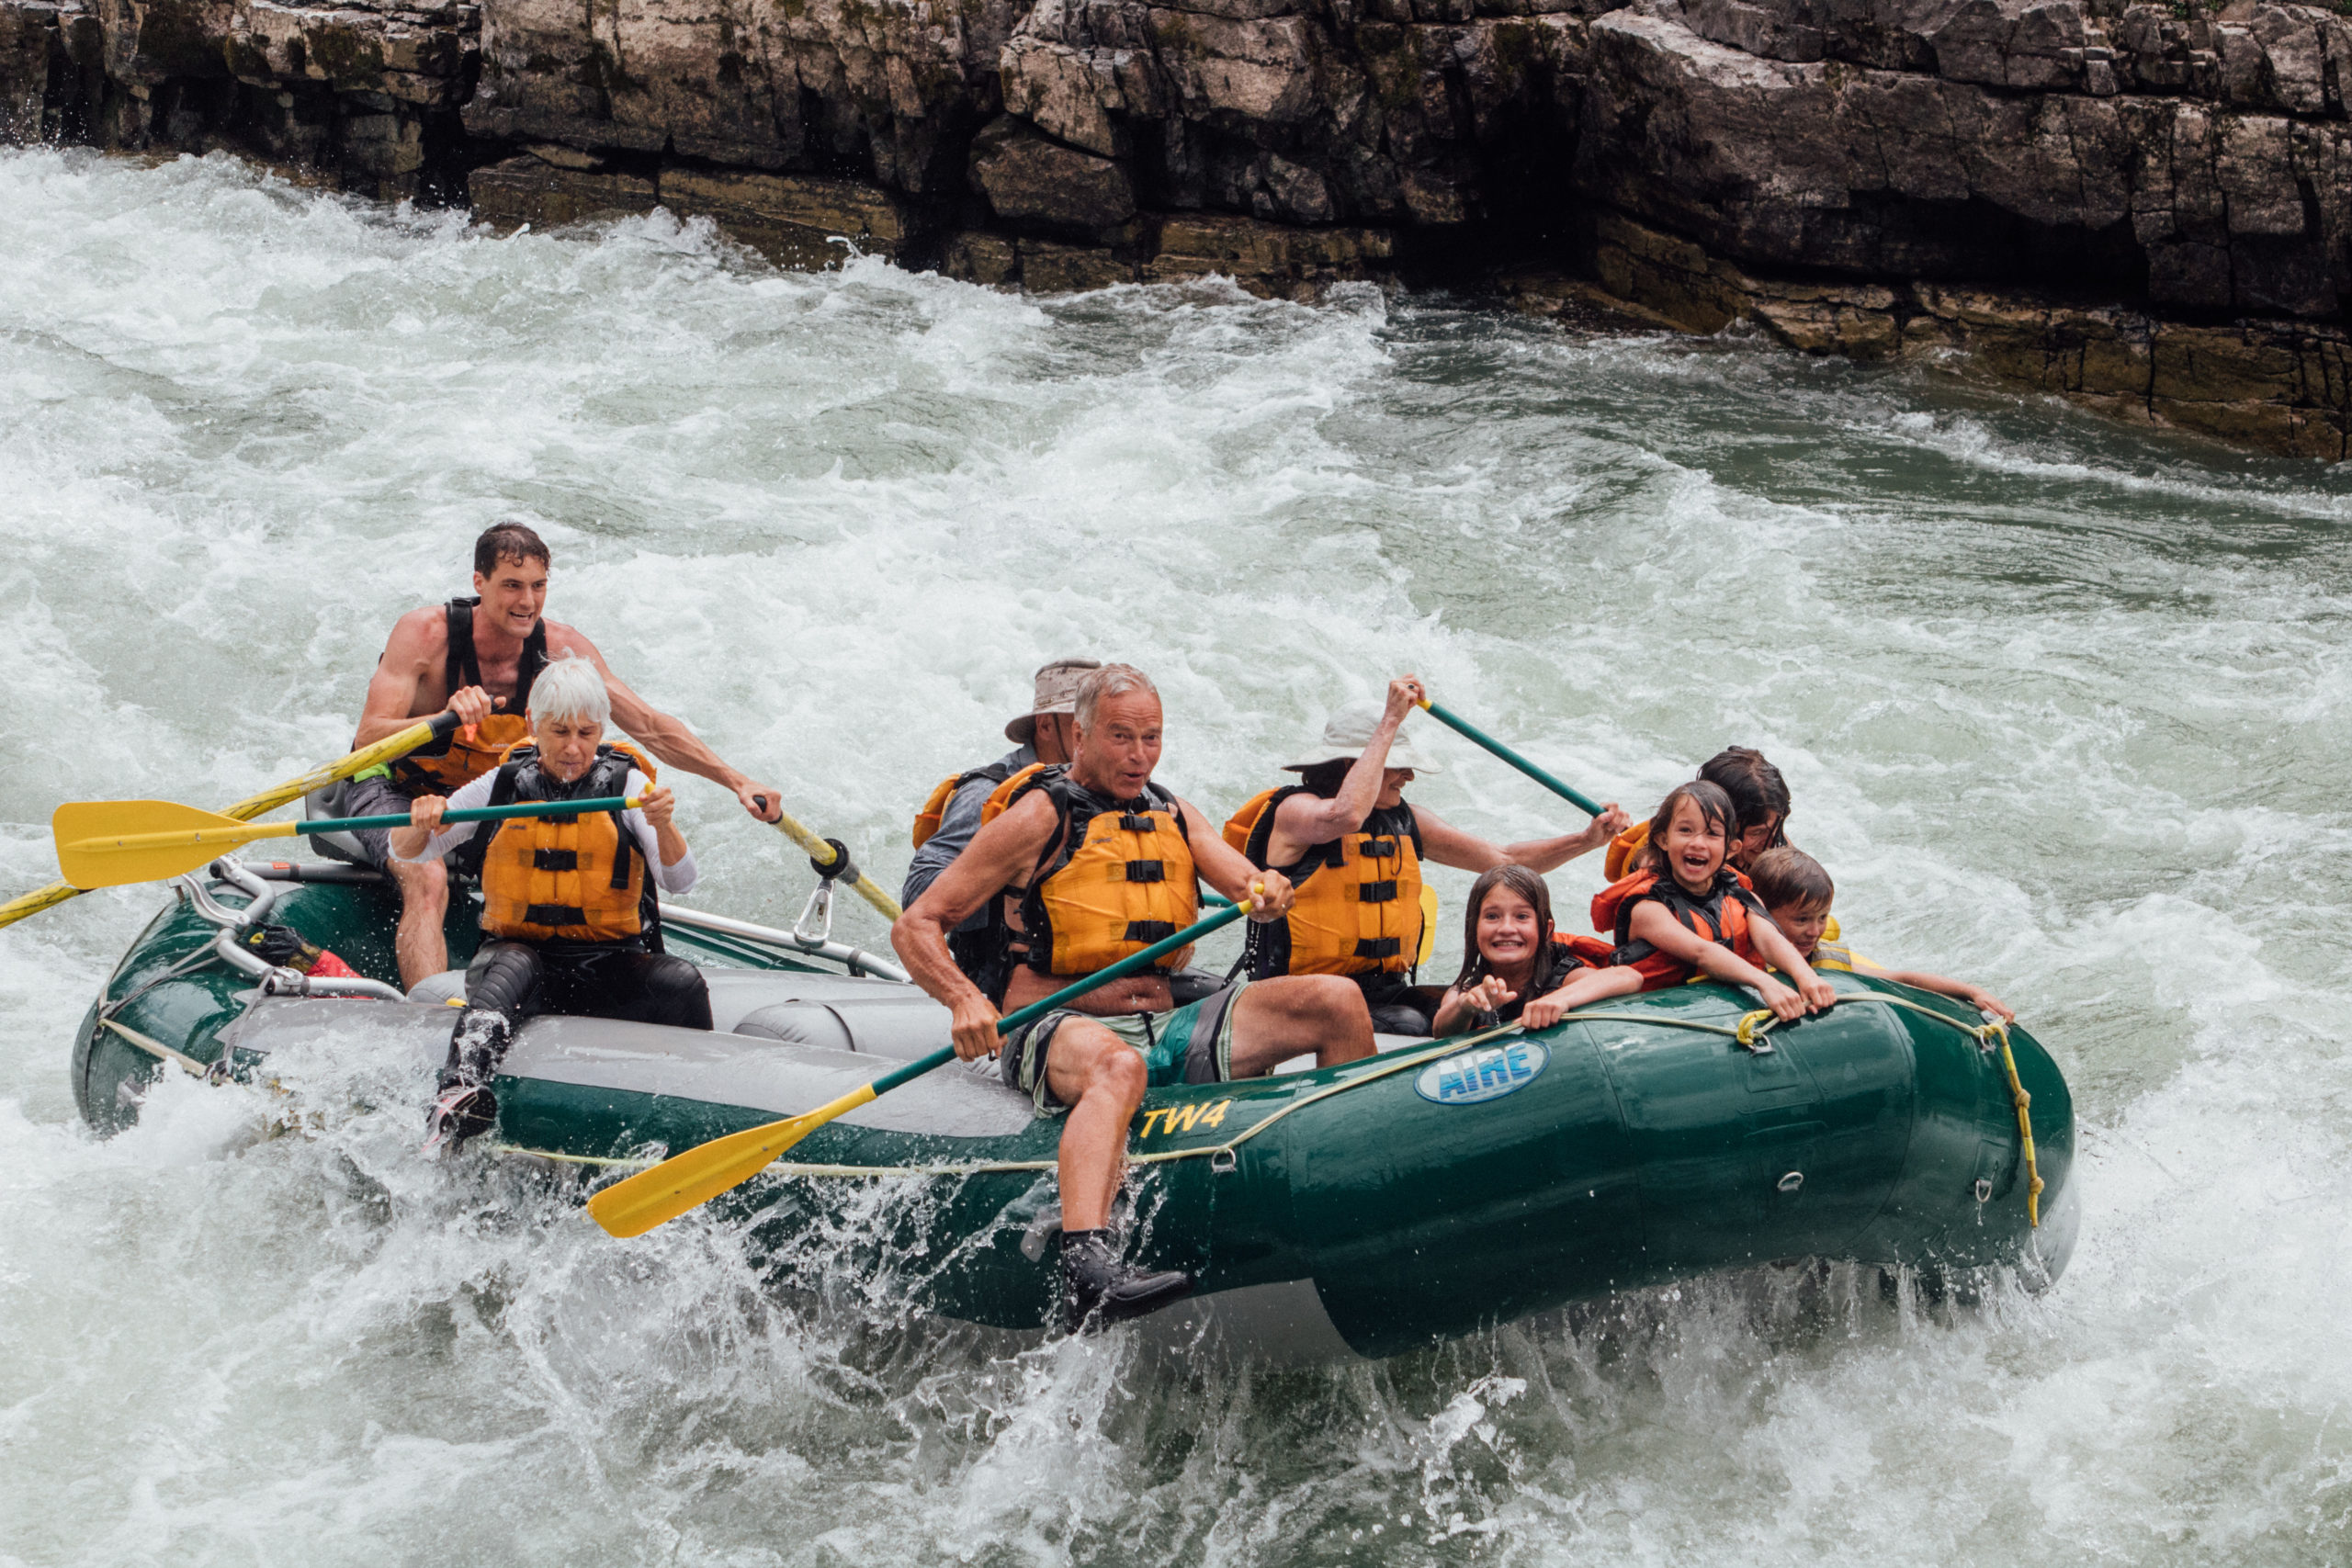 whitewater rafting and scenic combo trip on snake river in jackson hole